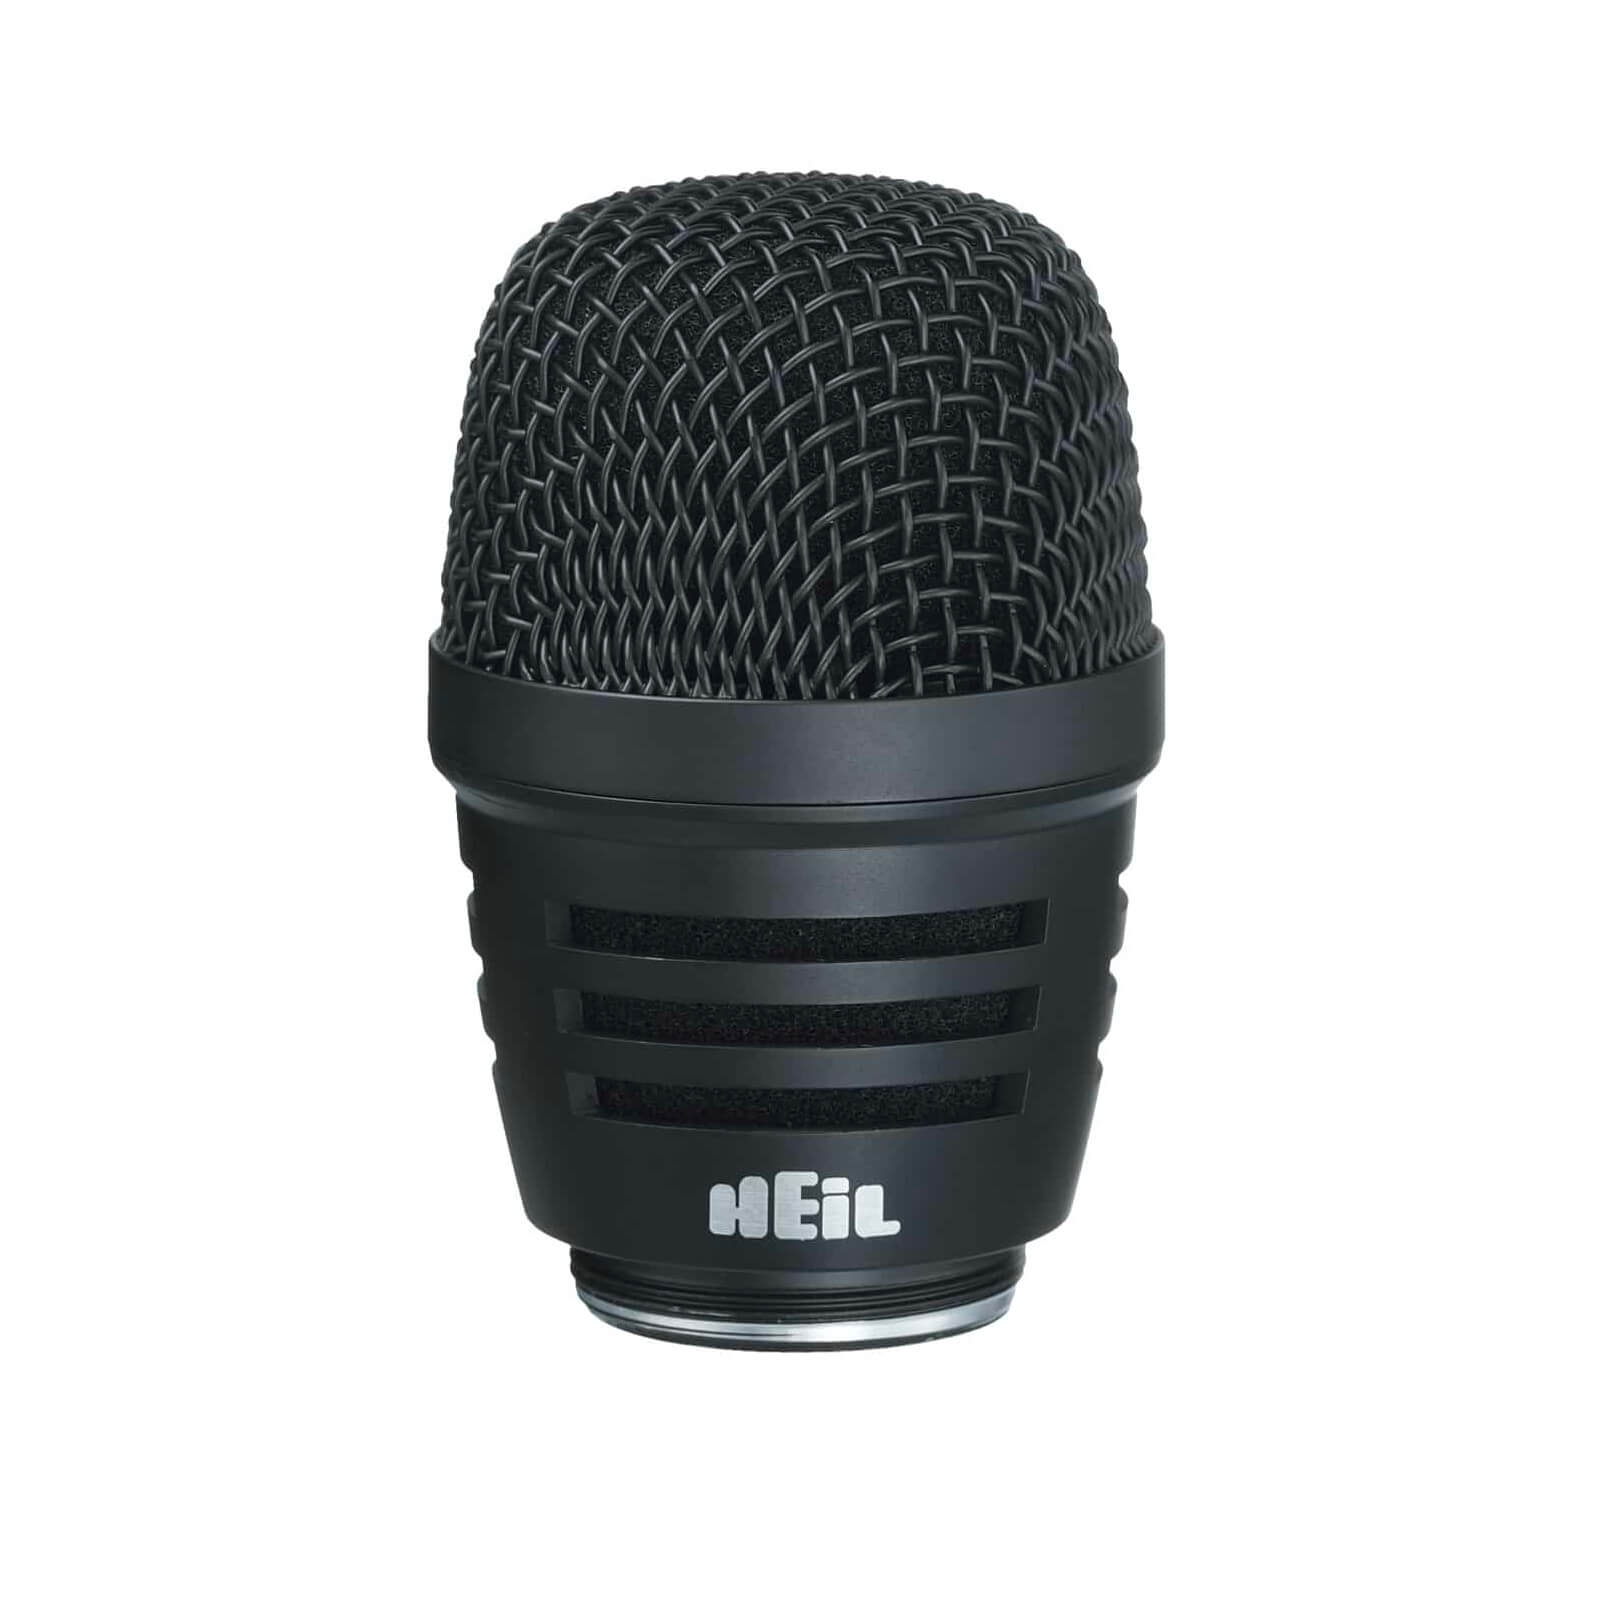 Heil RC 35 Replacement Microphone Capsule, black